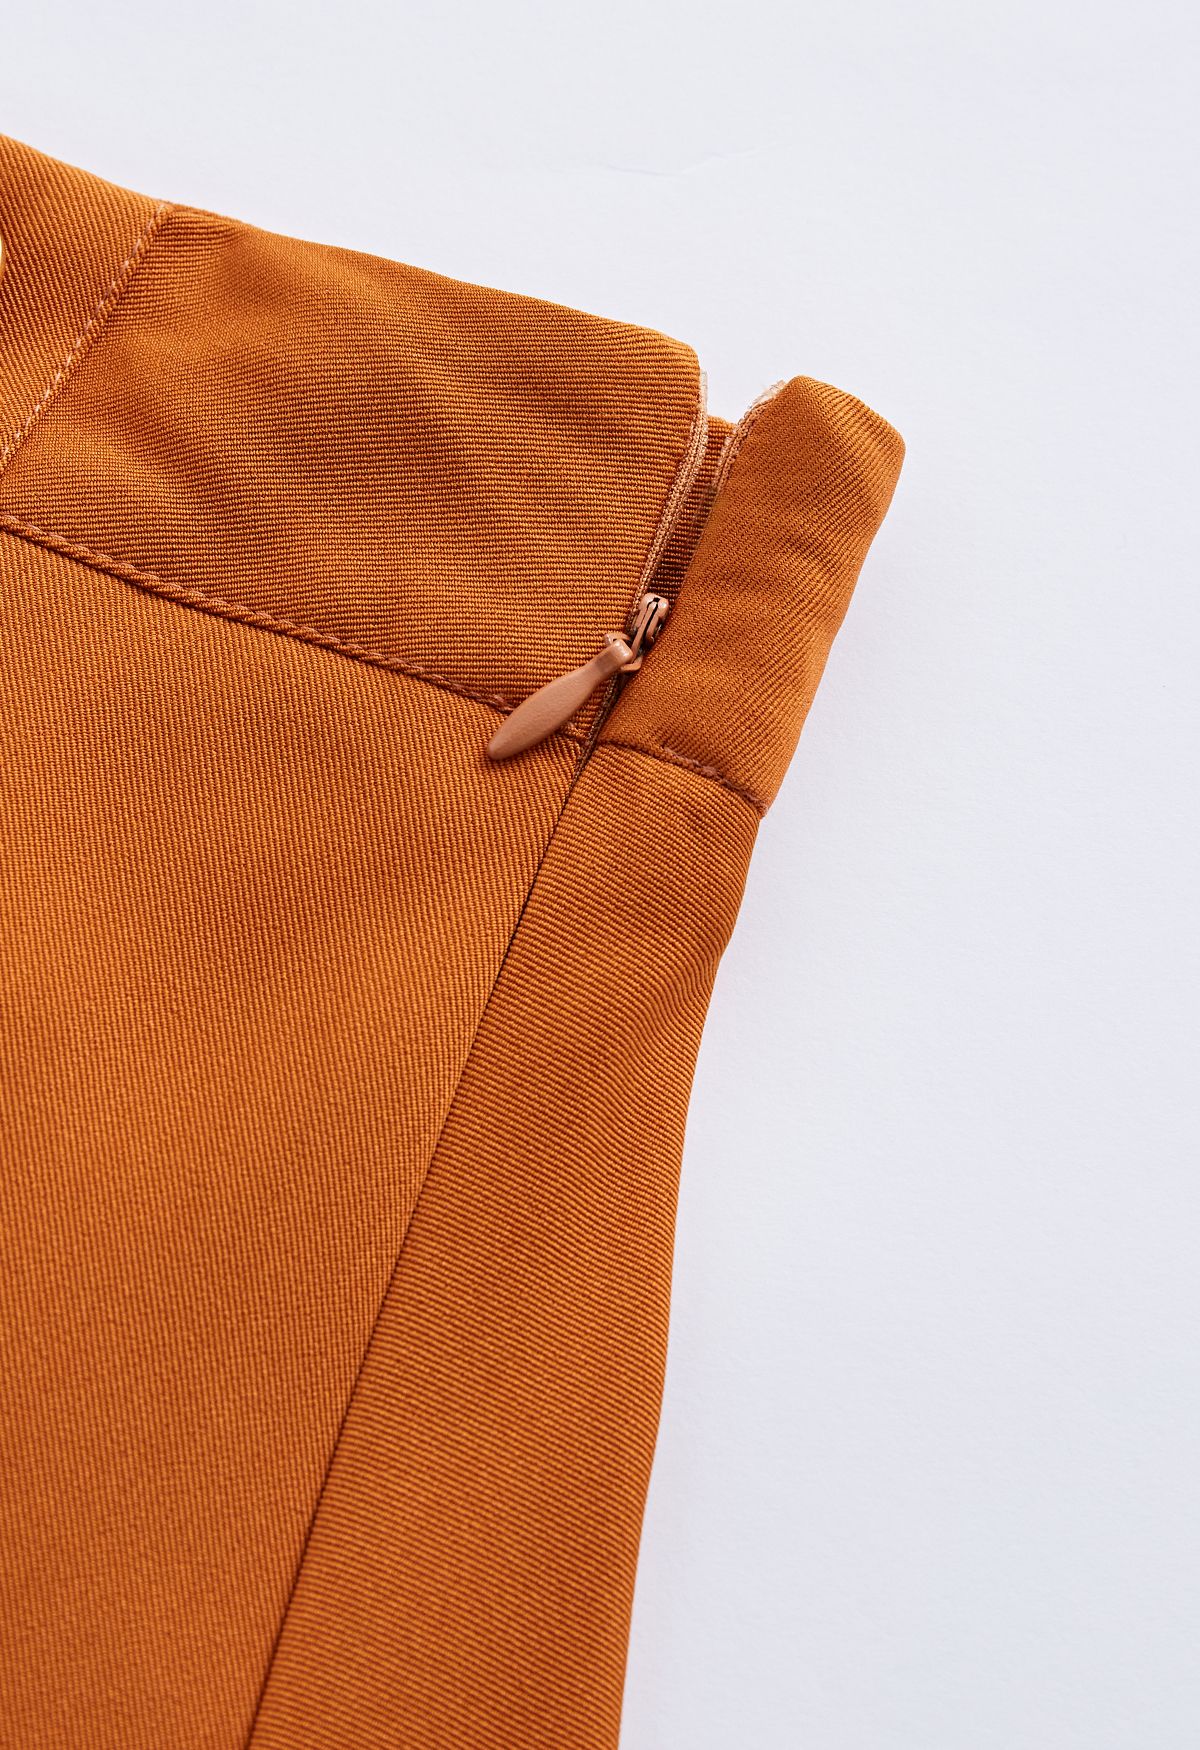 Buttoned Pleated A-Line Skirt in Pumpkin